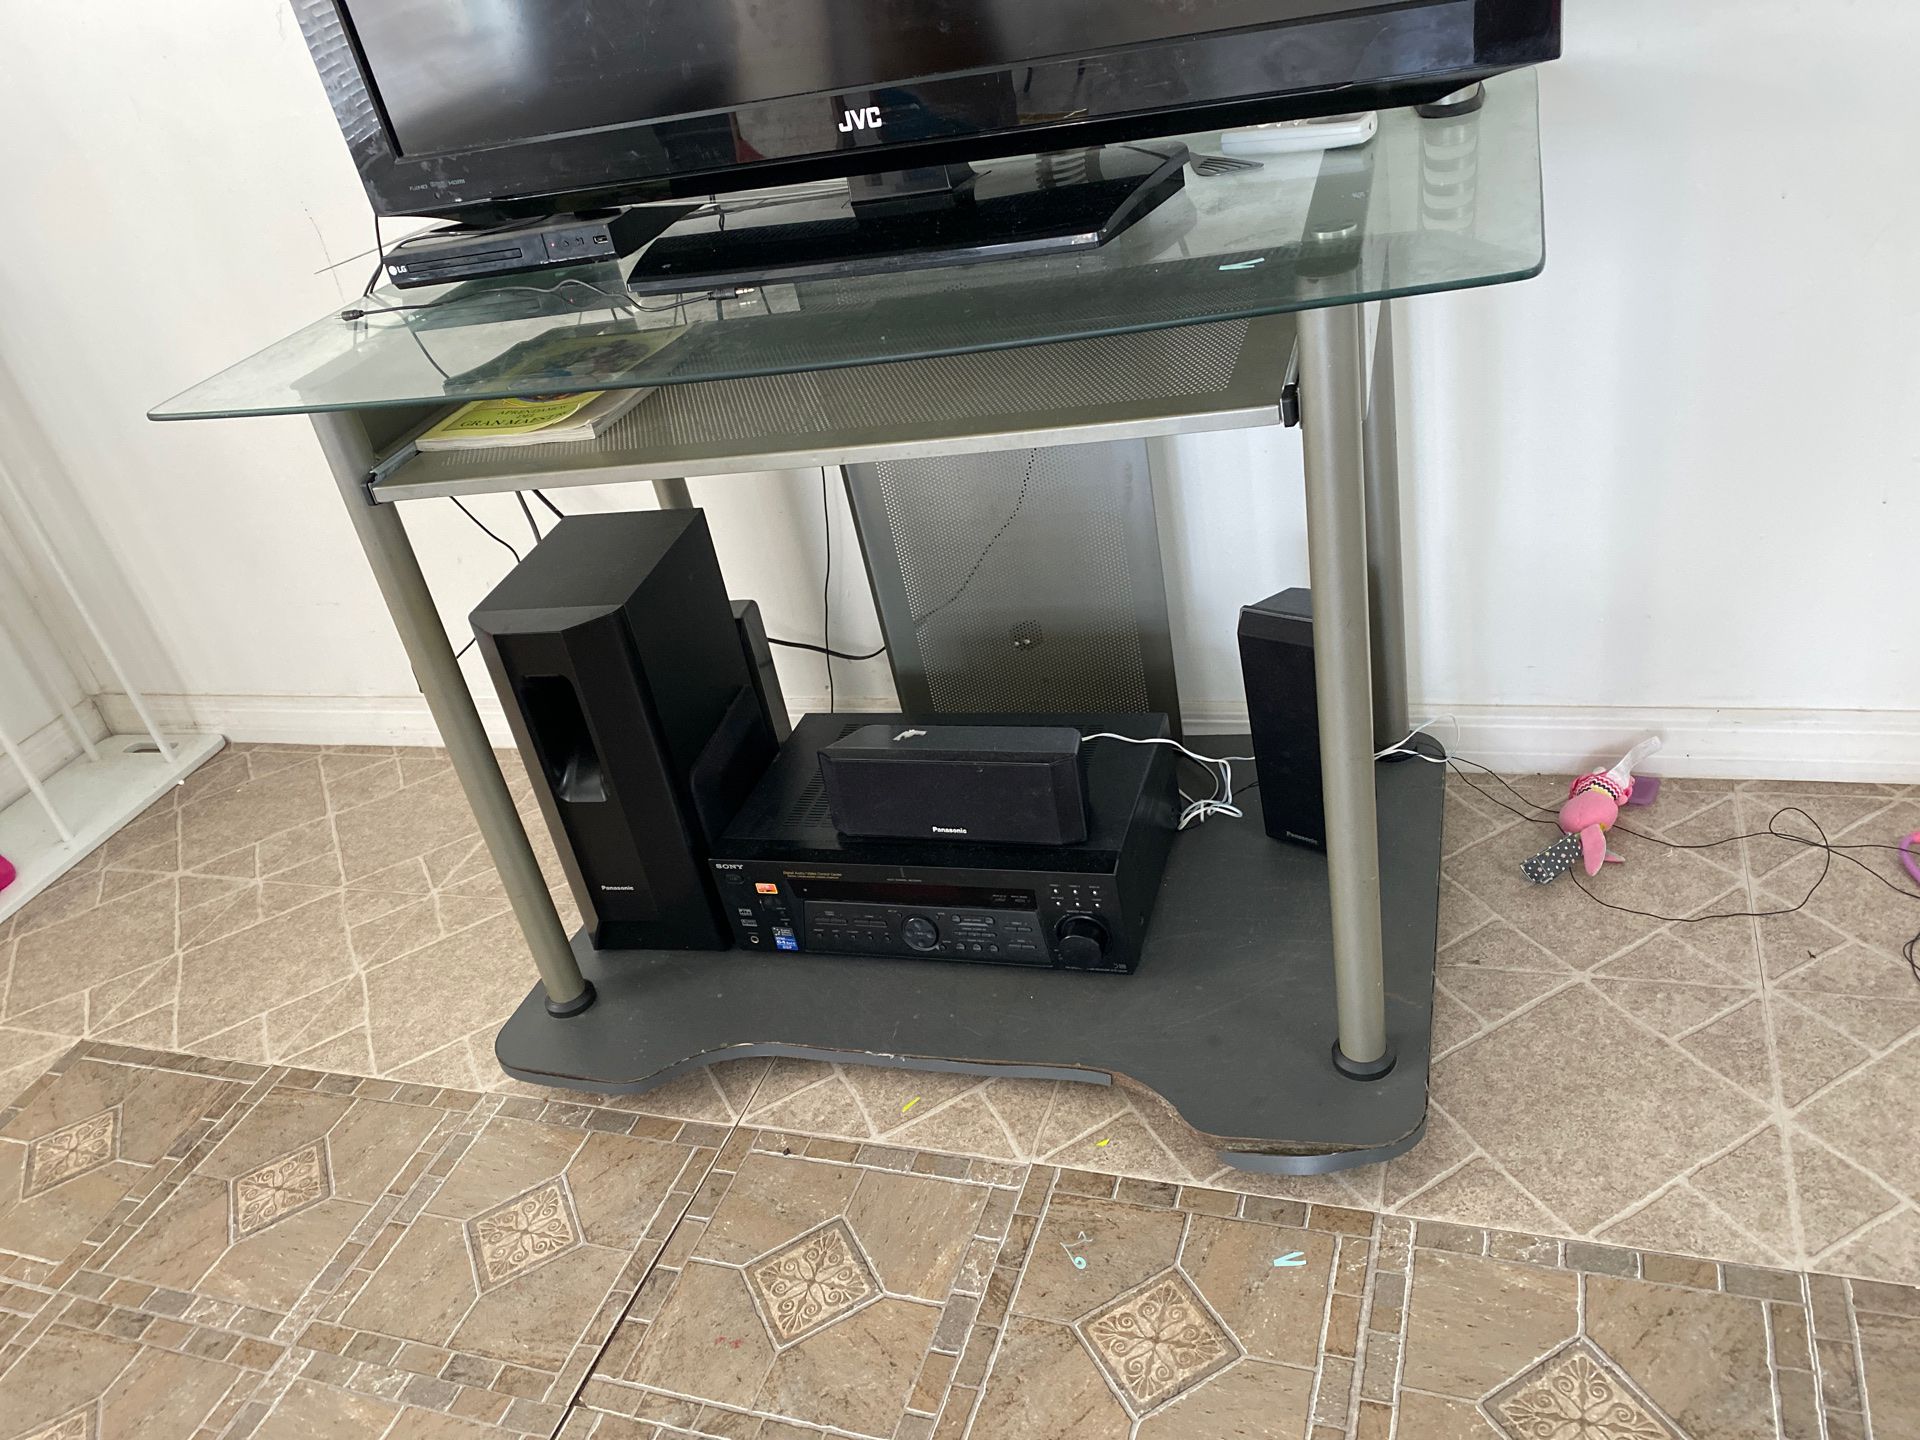 Computer desk or can be used for the tv as a stand